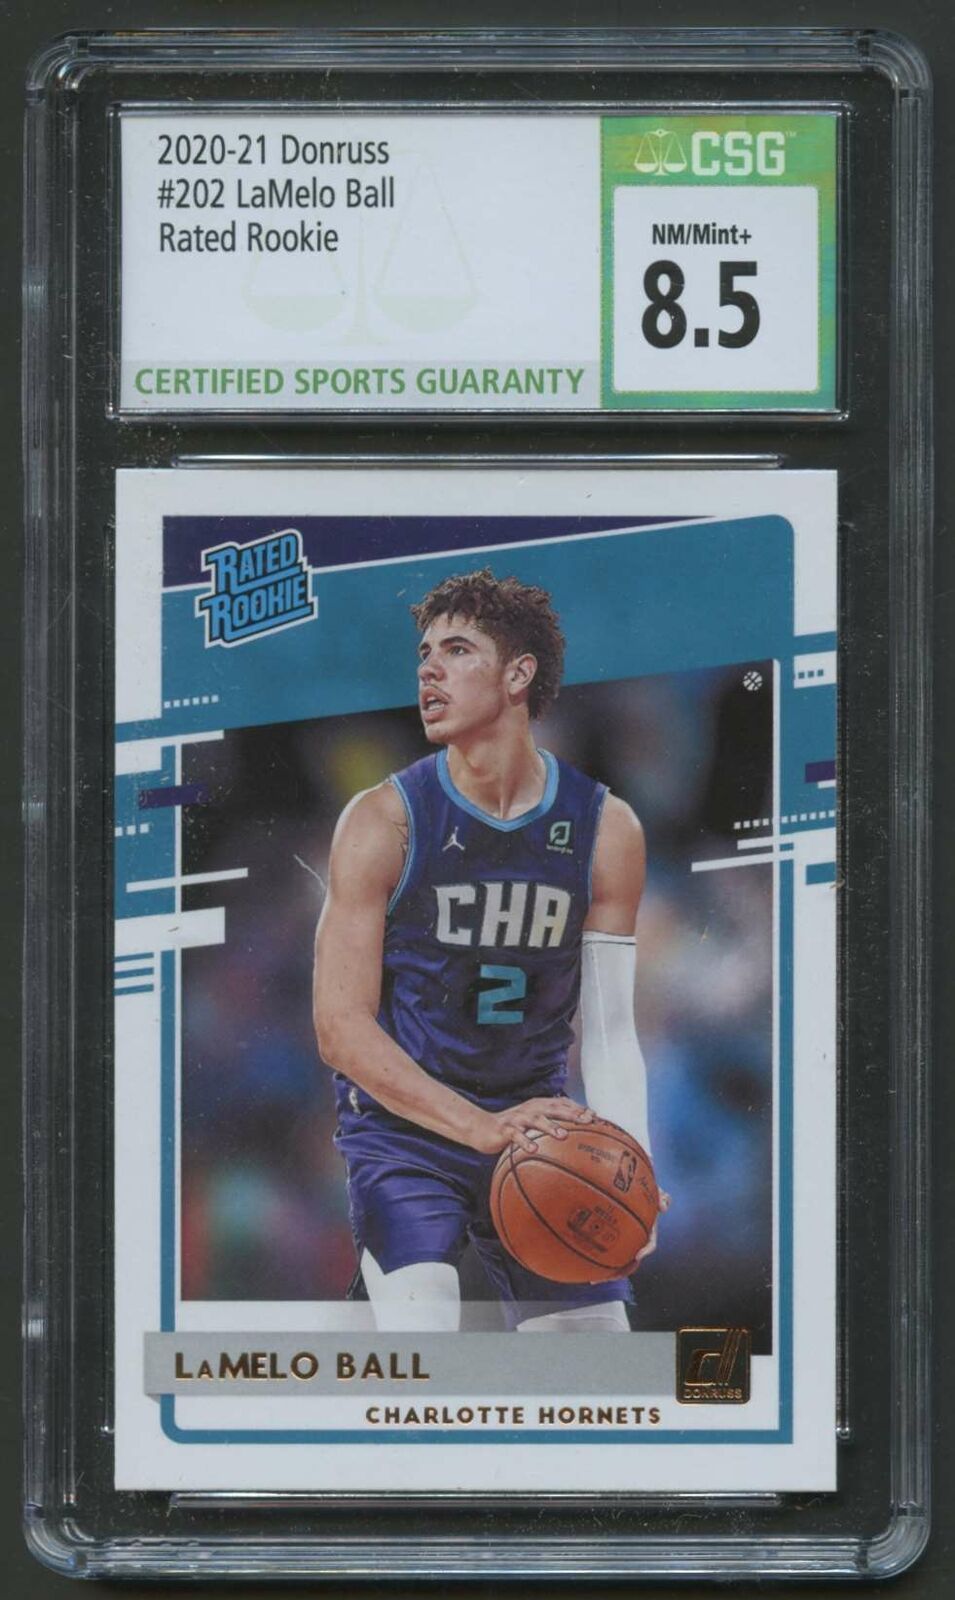 2020-21 DONRUSS RATED ROOKIE LAMELO BALL RC #202 CSG 8.5